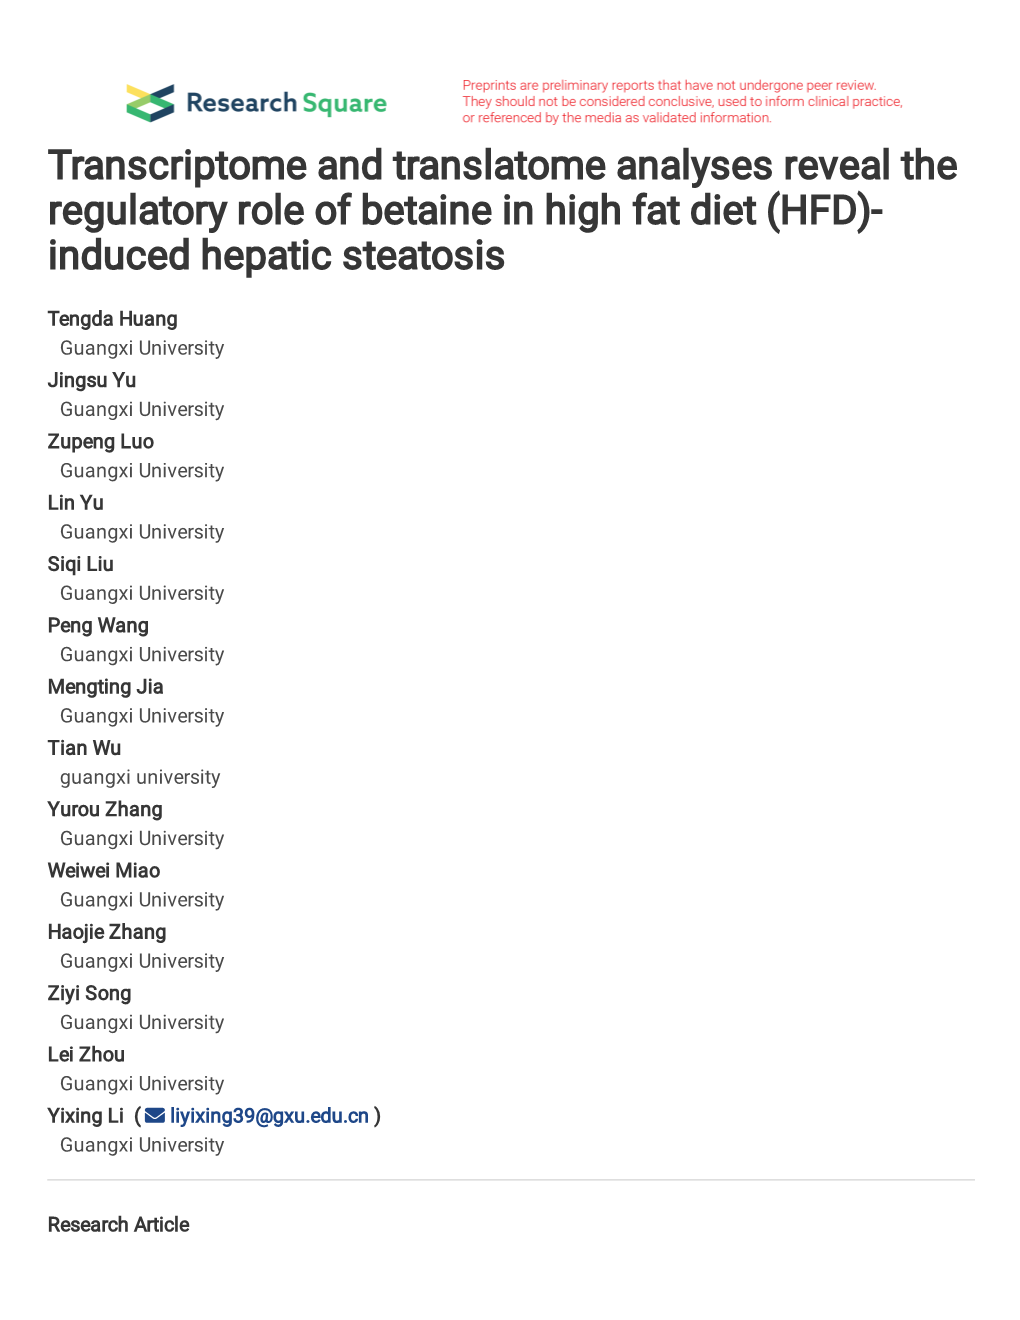 Transcriptome and Translatome Analyses Reveal the Regulatory Role of Betaine in High Fat Diet (HFD)- Induced Hepatic Steatosis